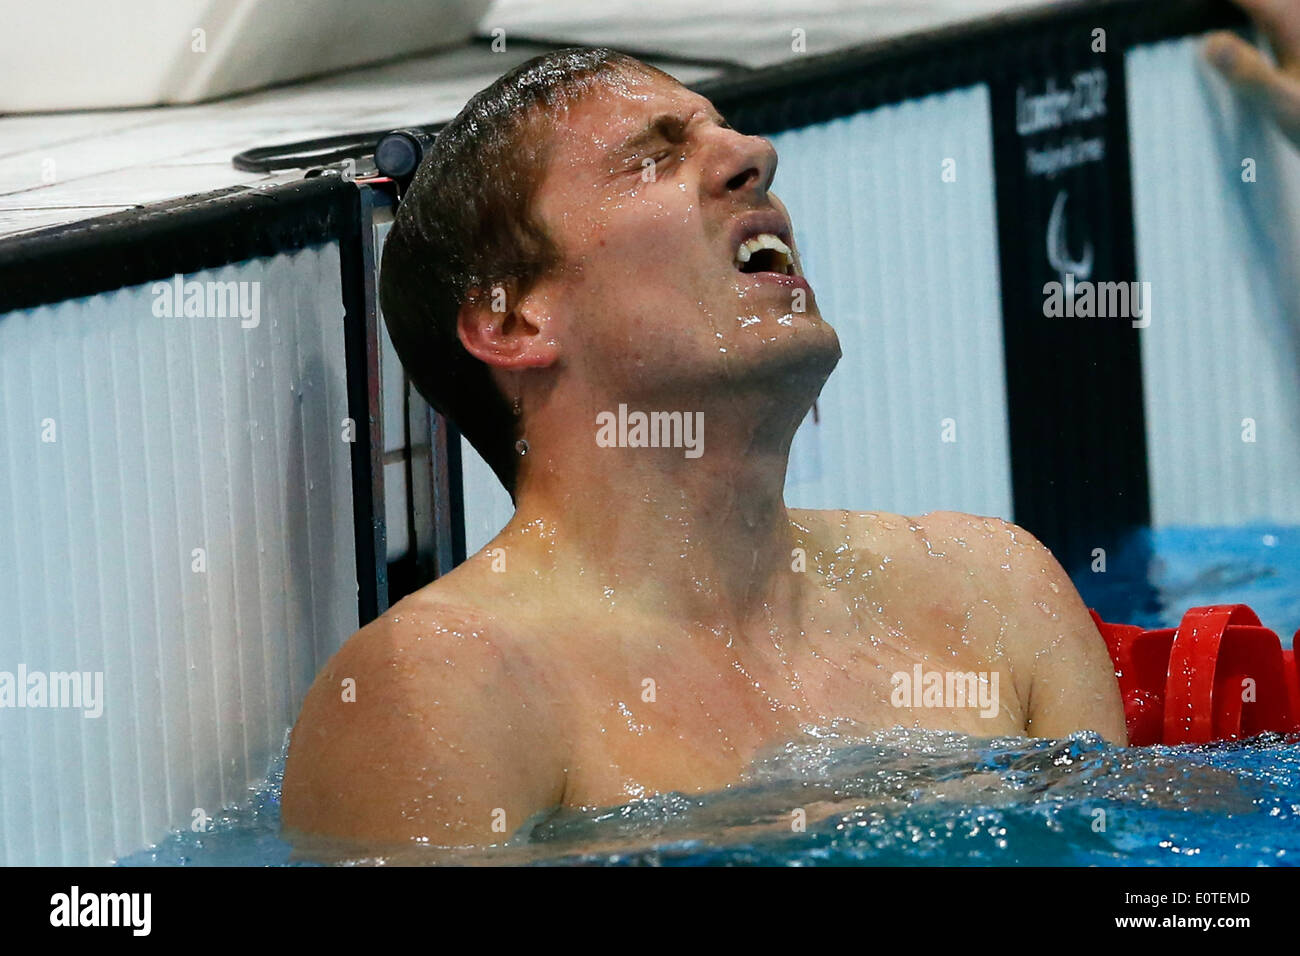 Matthew Cowdrey of Australia reacts after winning gold following the men's 100m Freestyle - S9 final swimming session competition held at the Aquatics Center during the London 2012 Paralympic Games in London, Britain, 07 September 2012. Stock Photo